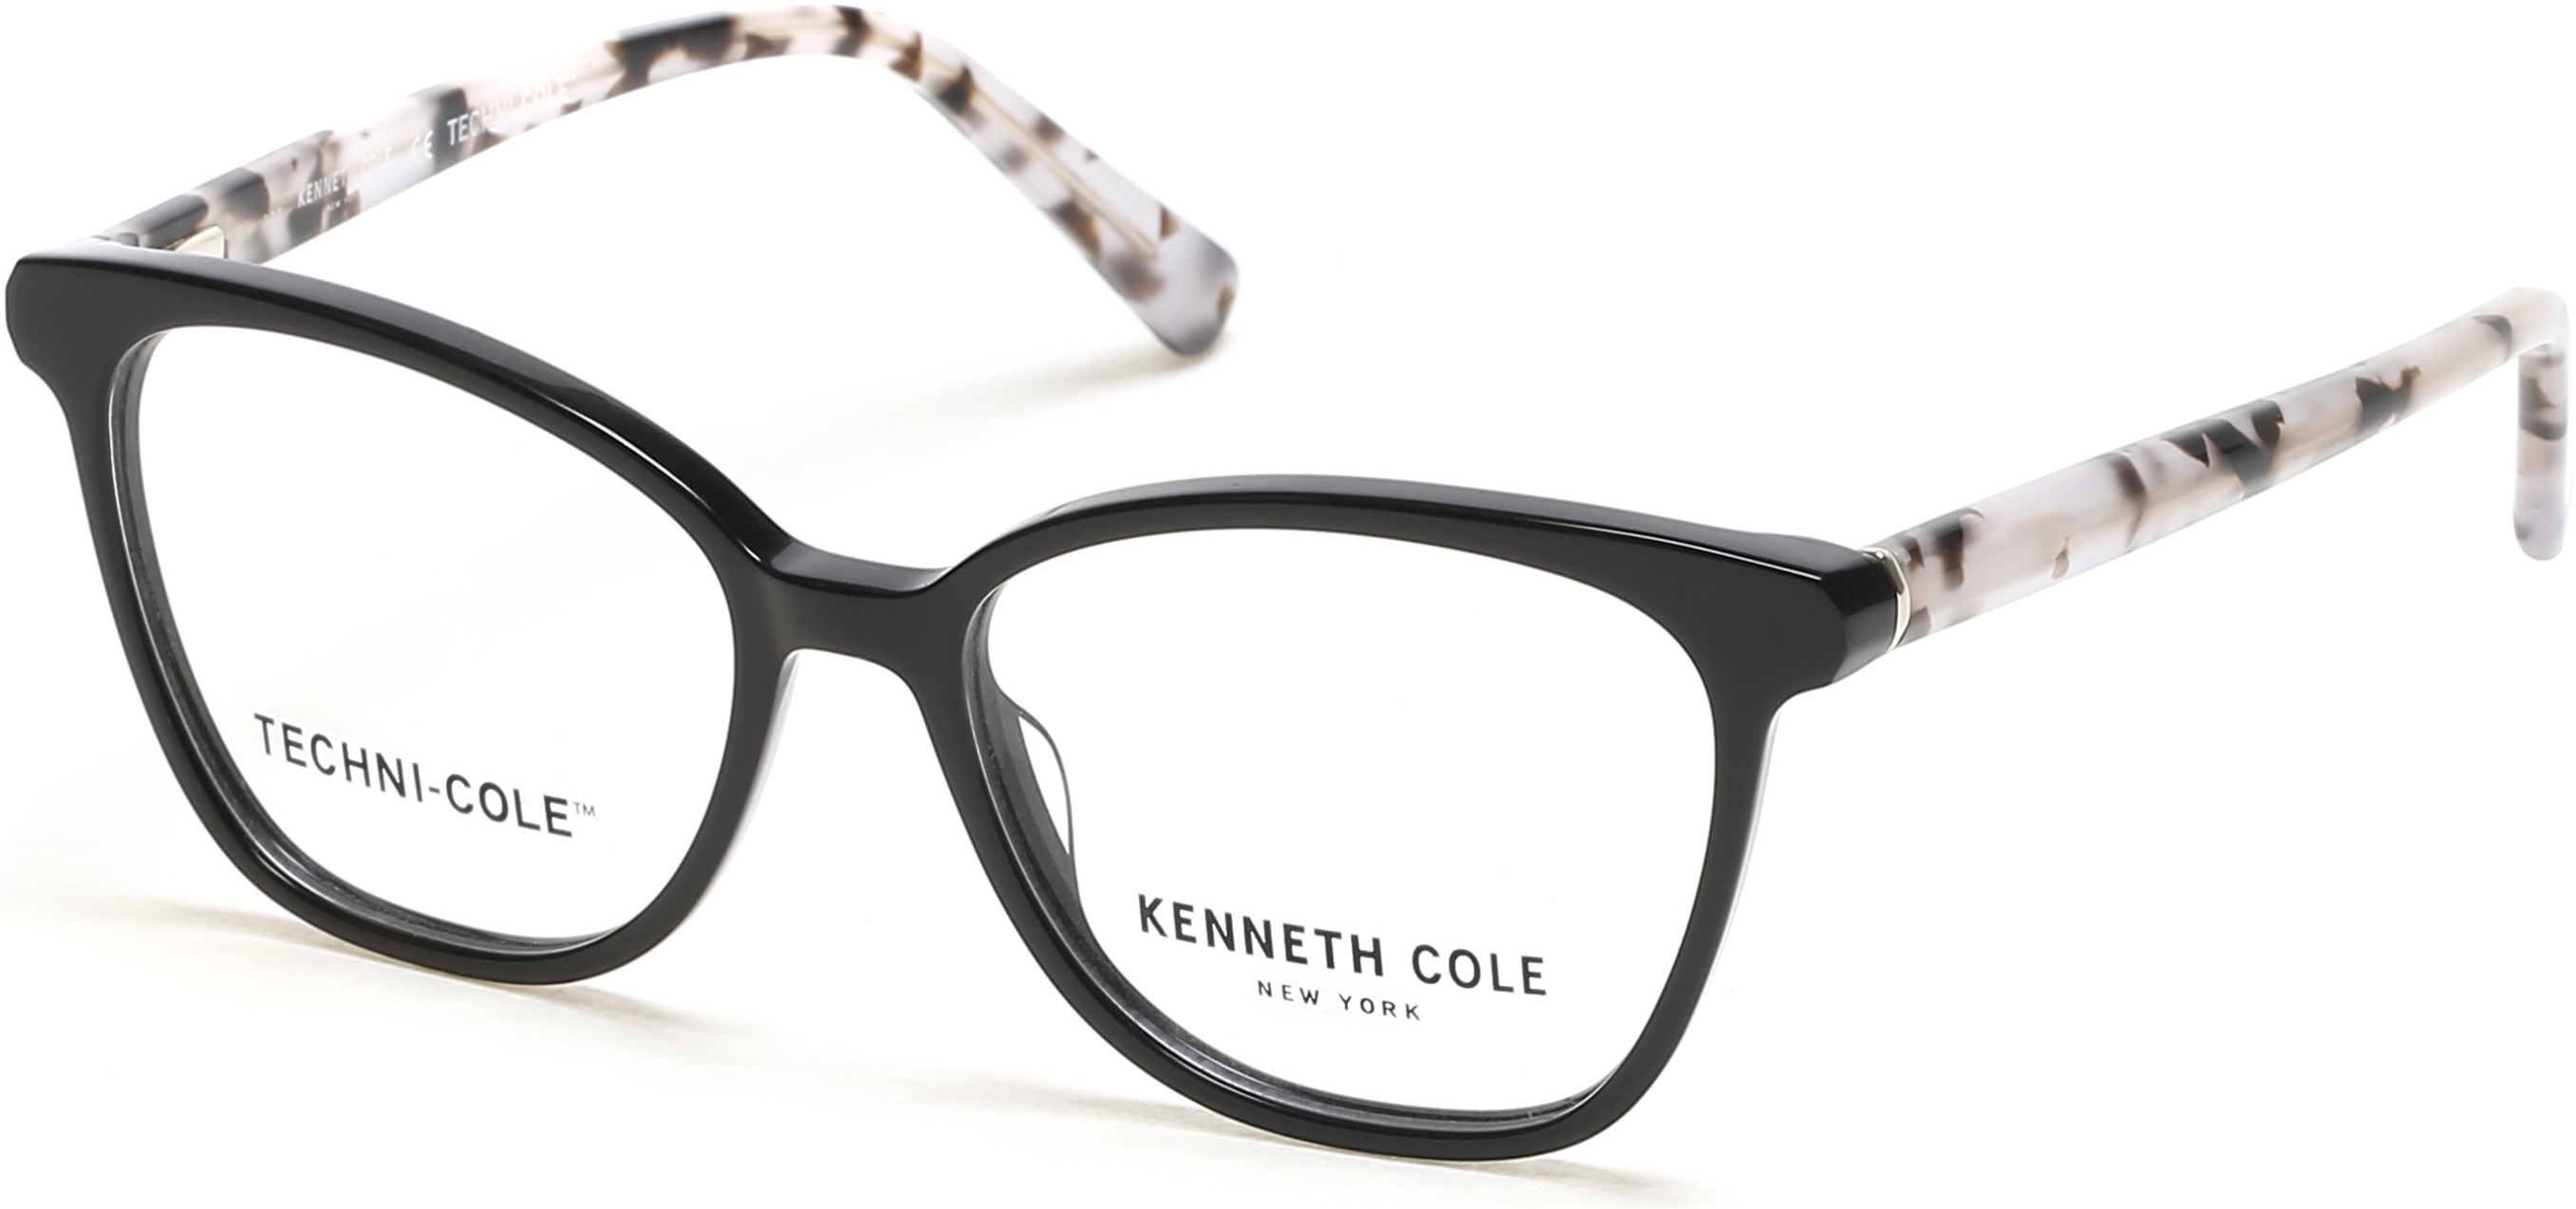 KENNETH COLE NY 0327